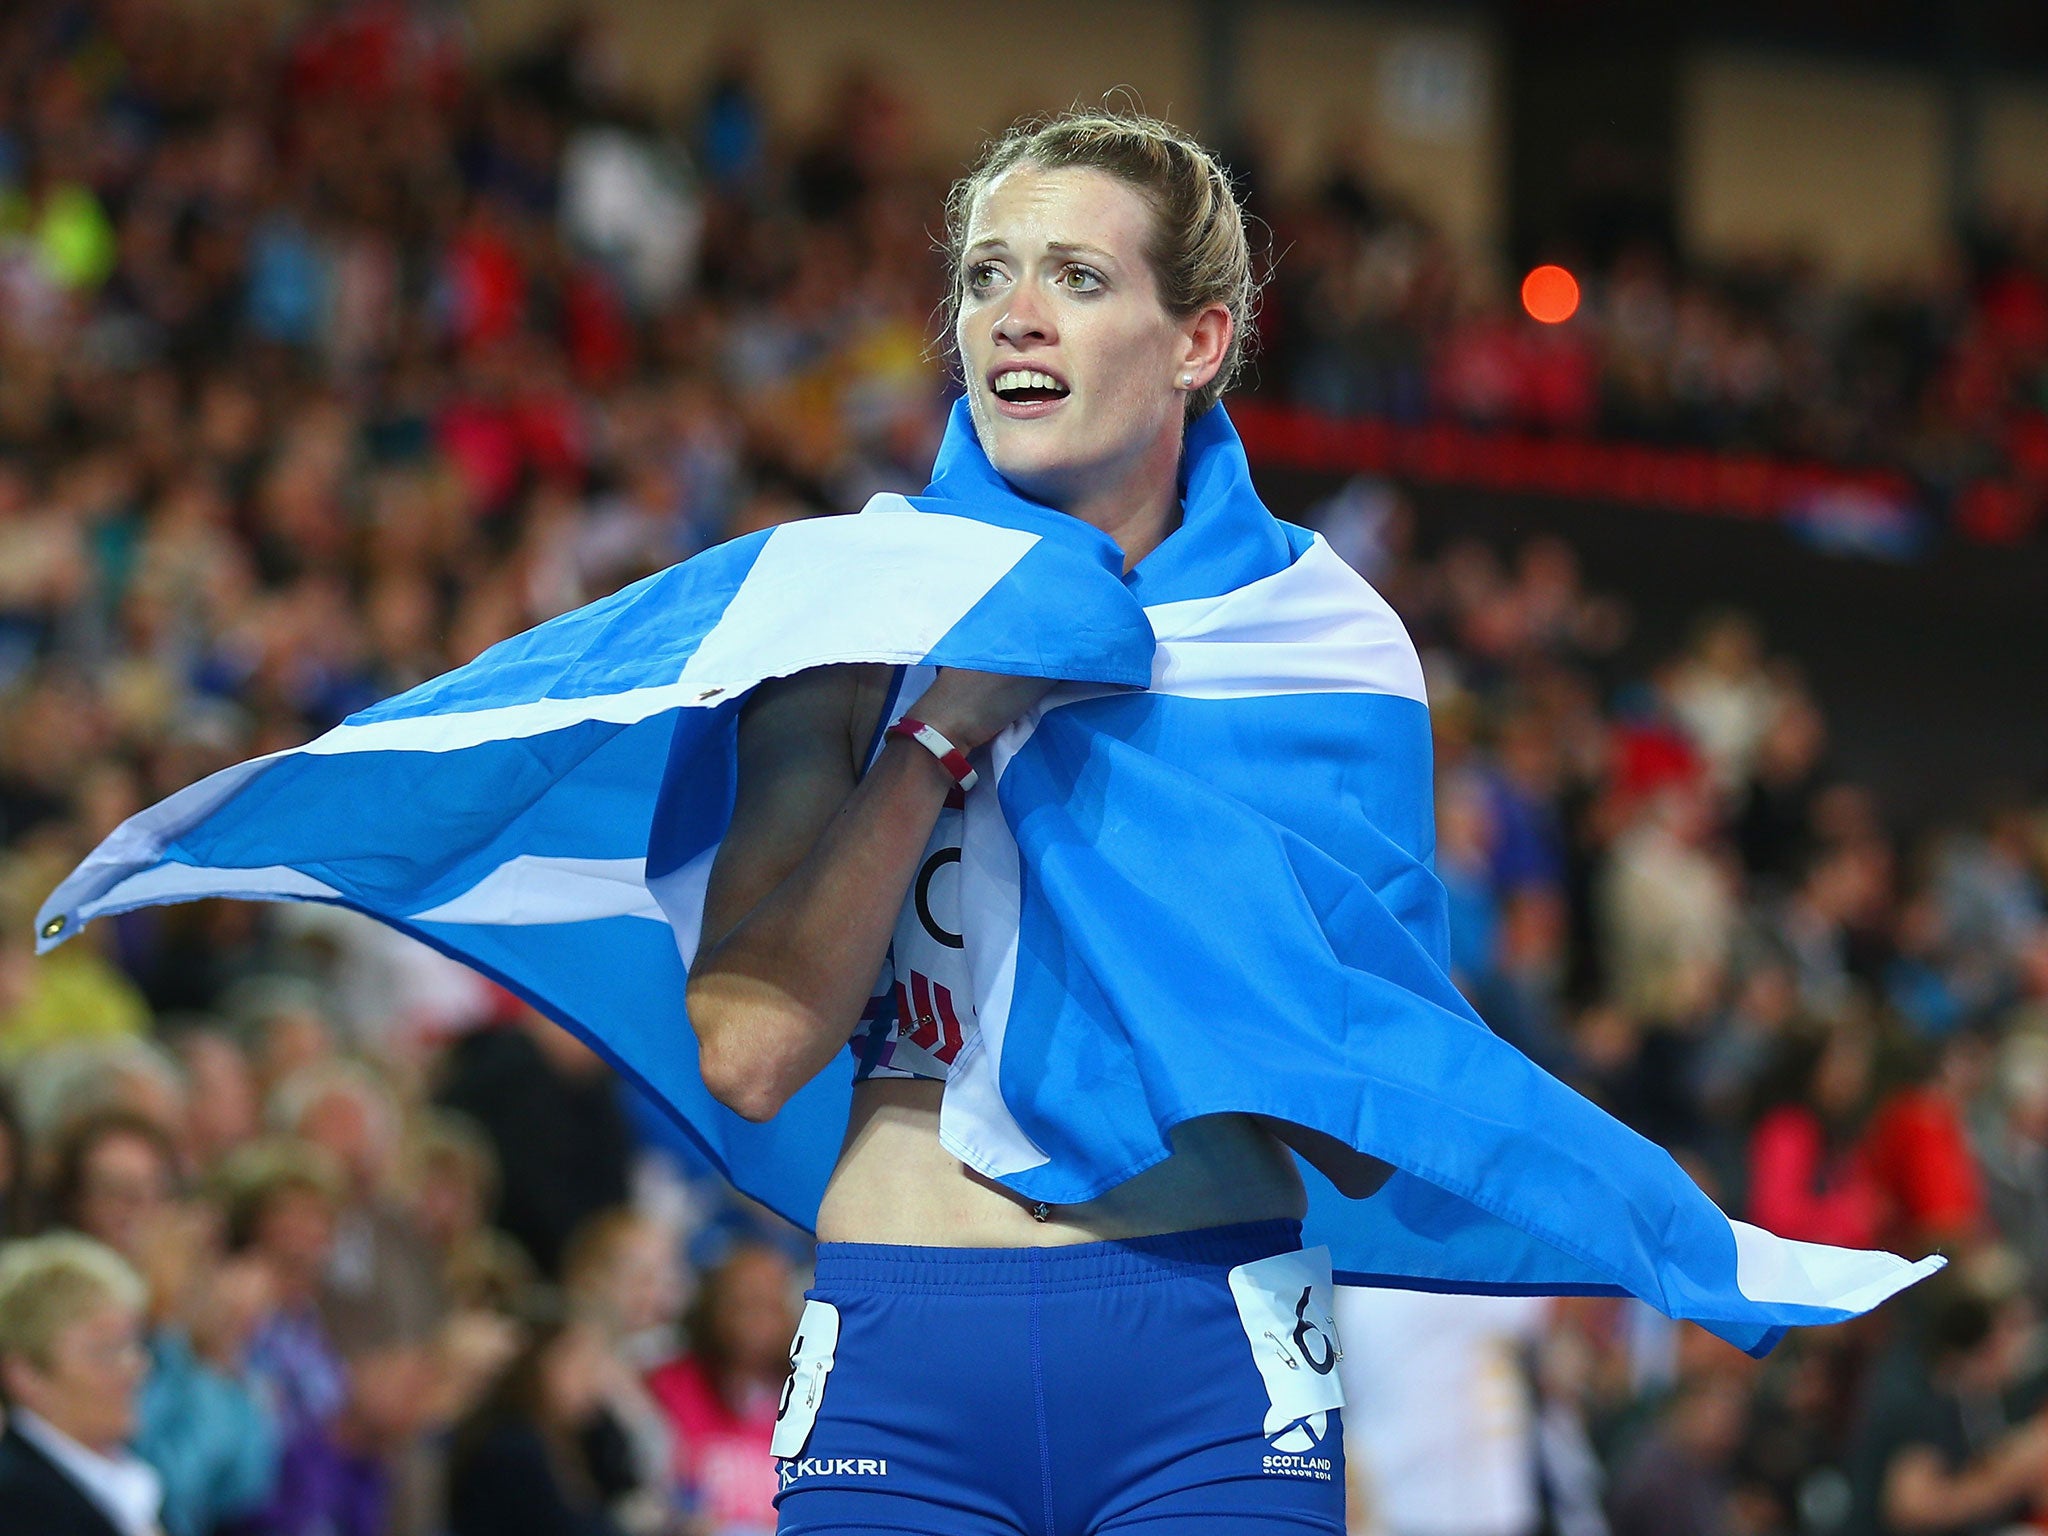 Eilidh Child embarks on a lap of honour after coming second in the 400m hurdles